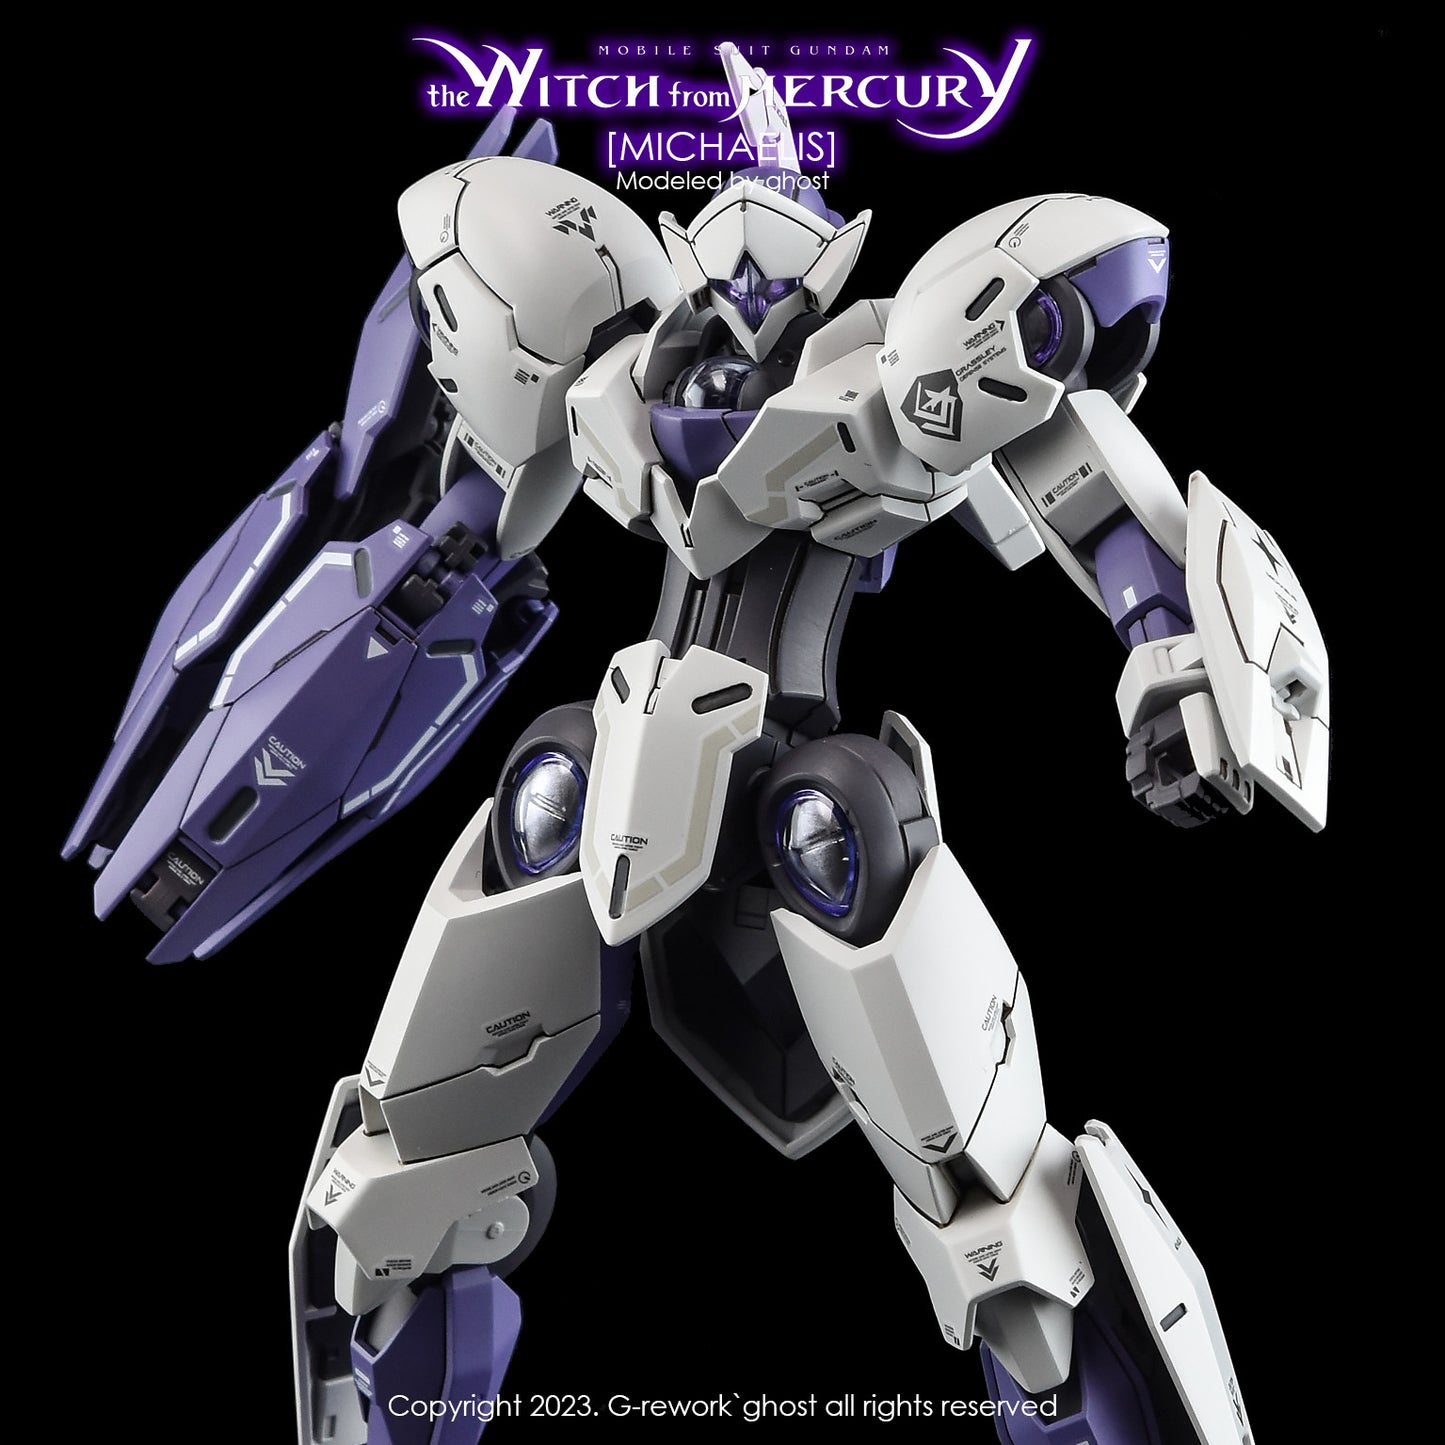 G-Rework [HG] MICHAELIS [witch from mercury] water decal